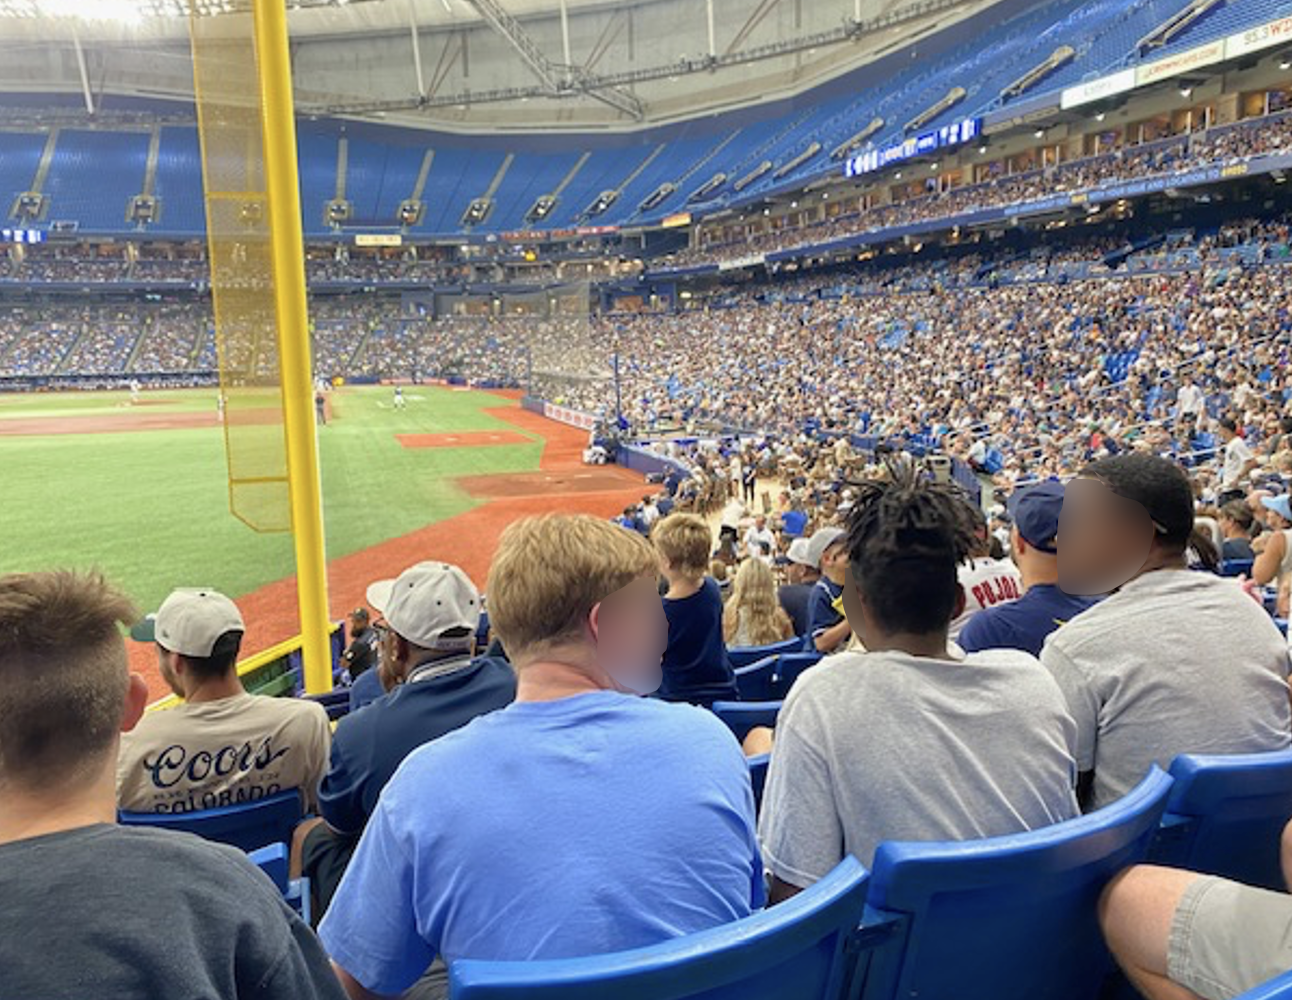 Several youth and Brooksville YA CEO attend a MLB Game between the Tampa Bay Ray and New York Yankees.